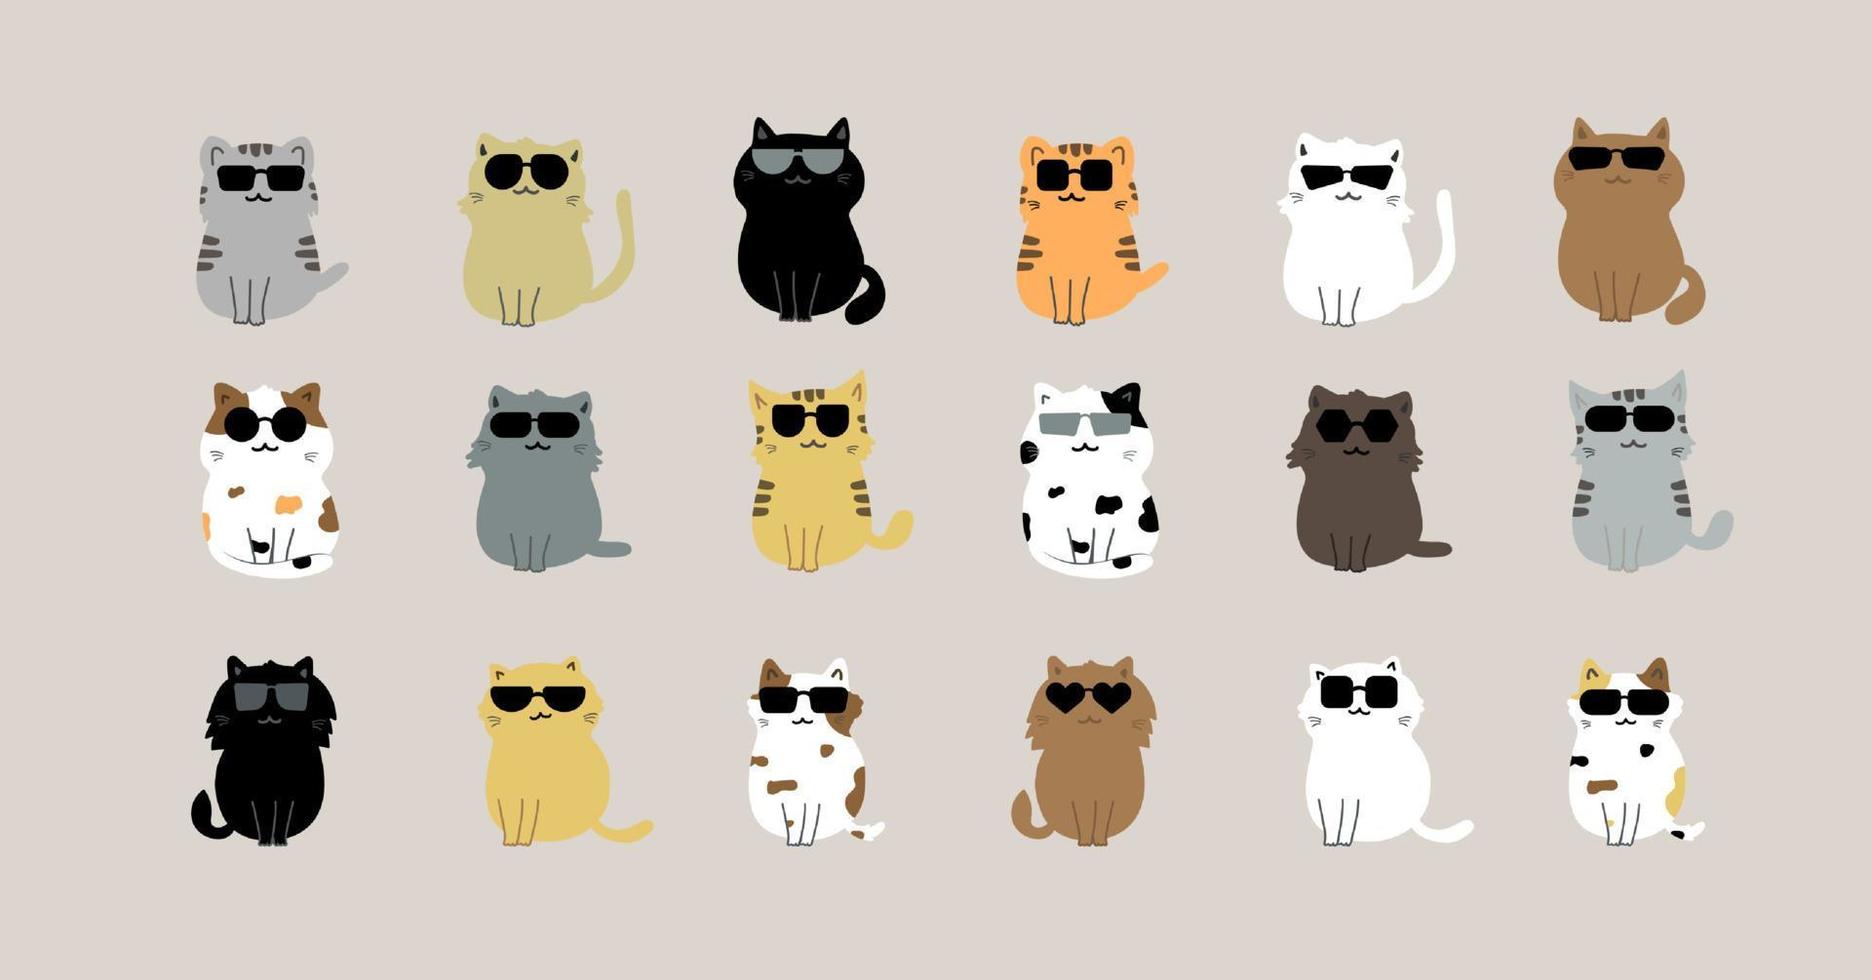 Cat with sunglasses cartoon character pack vector